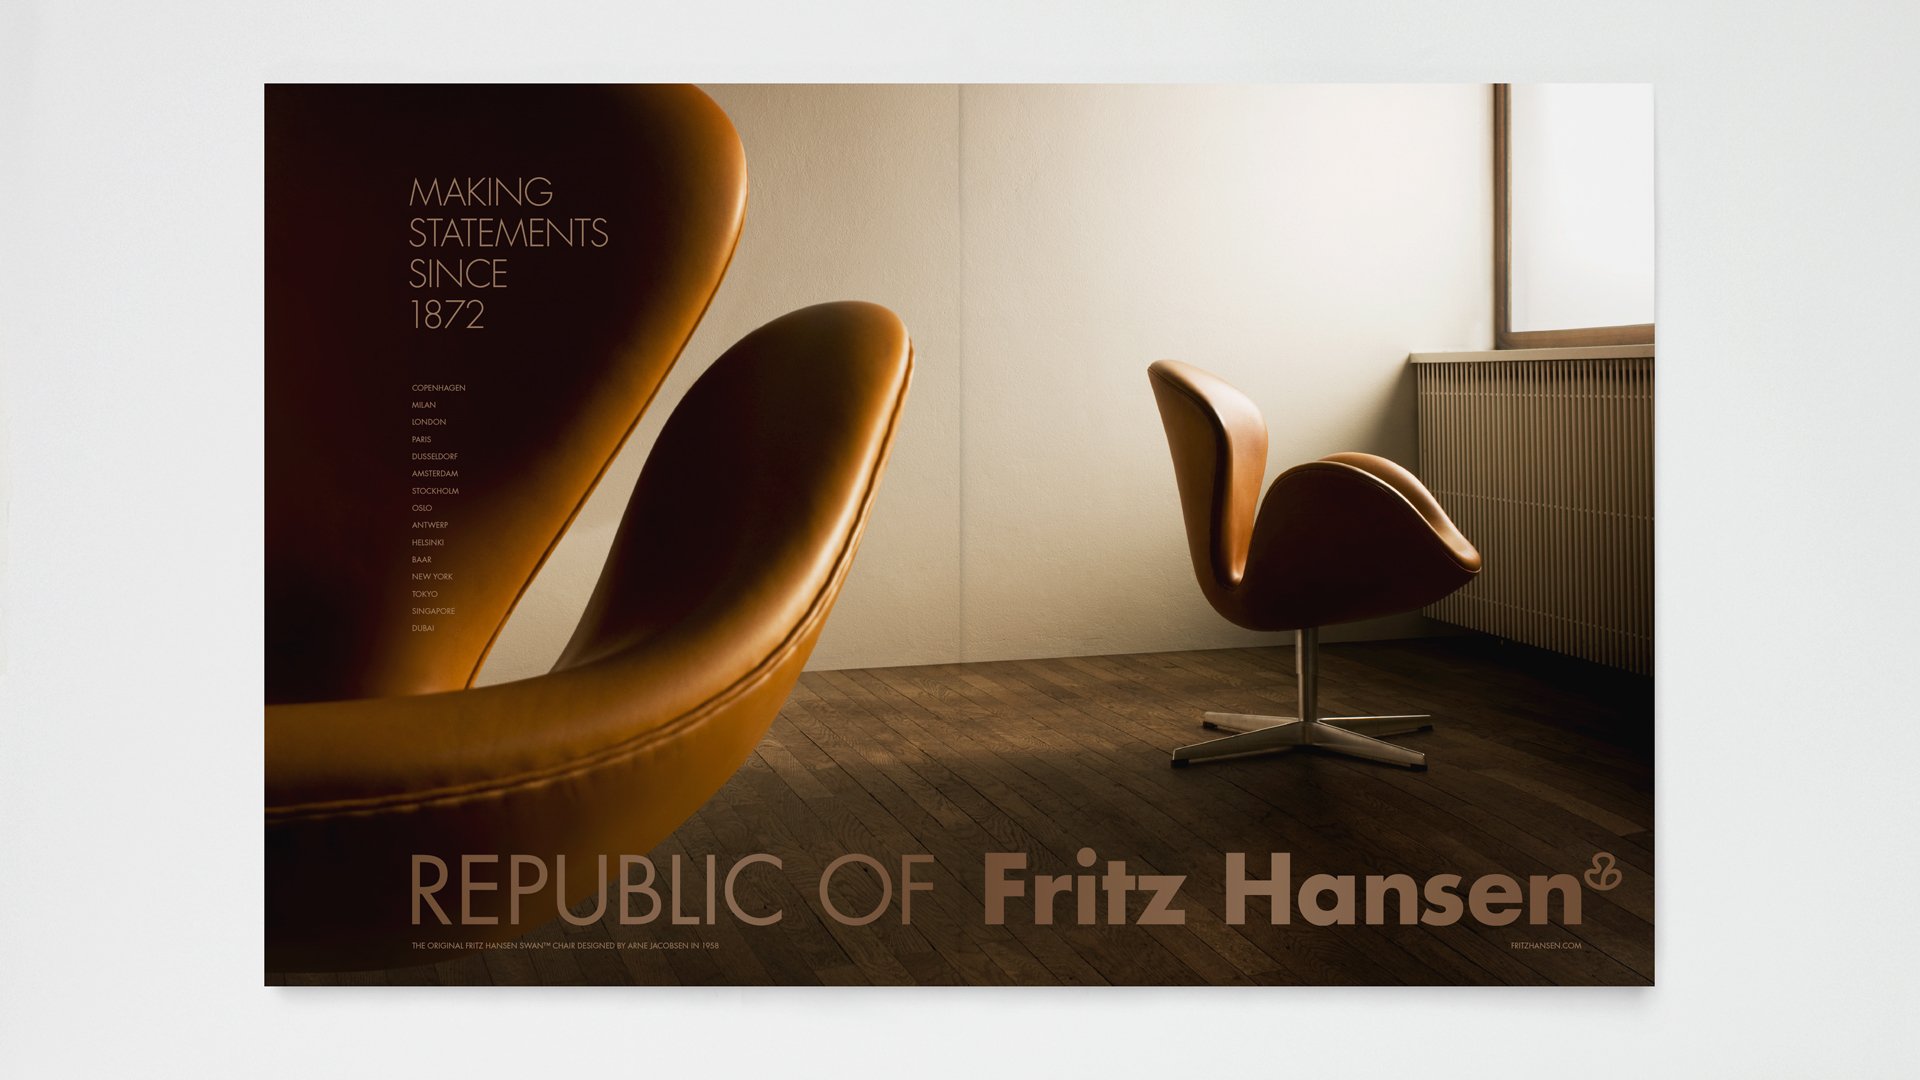 Image of the swan chair with Fritz Hansen logo. Made by LOOP Associates